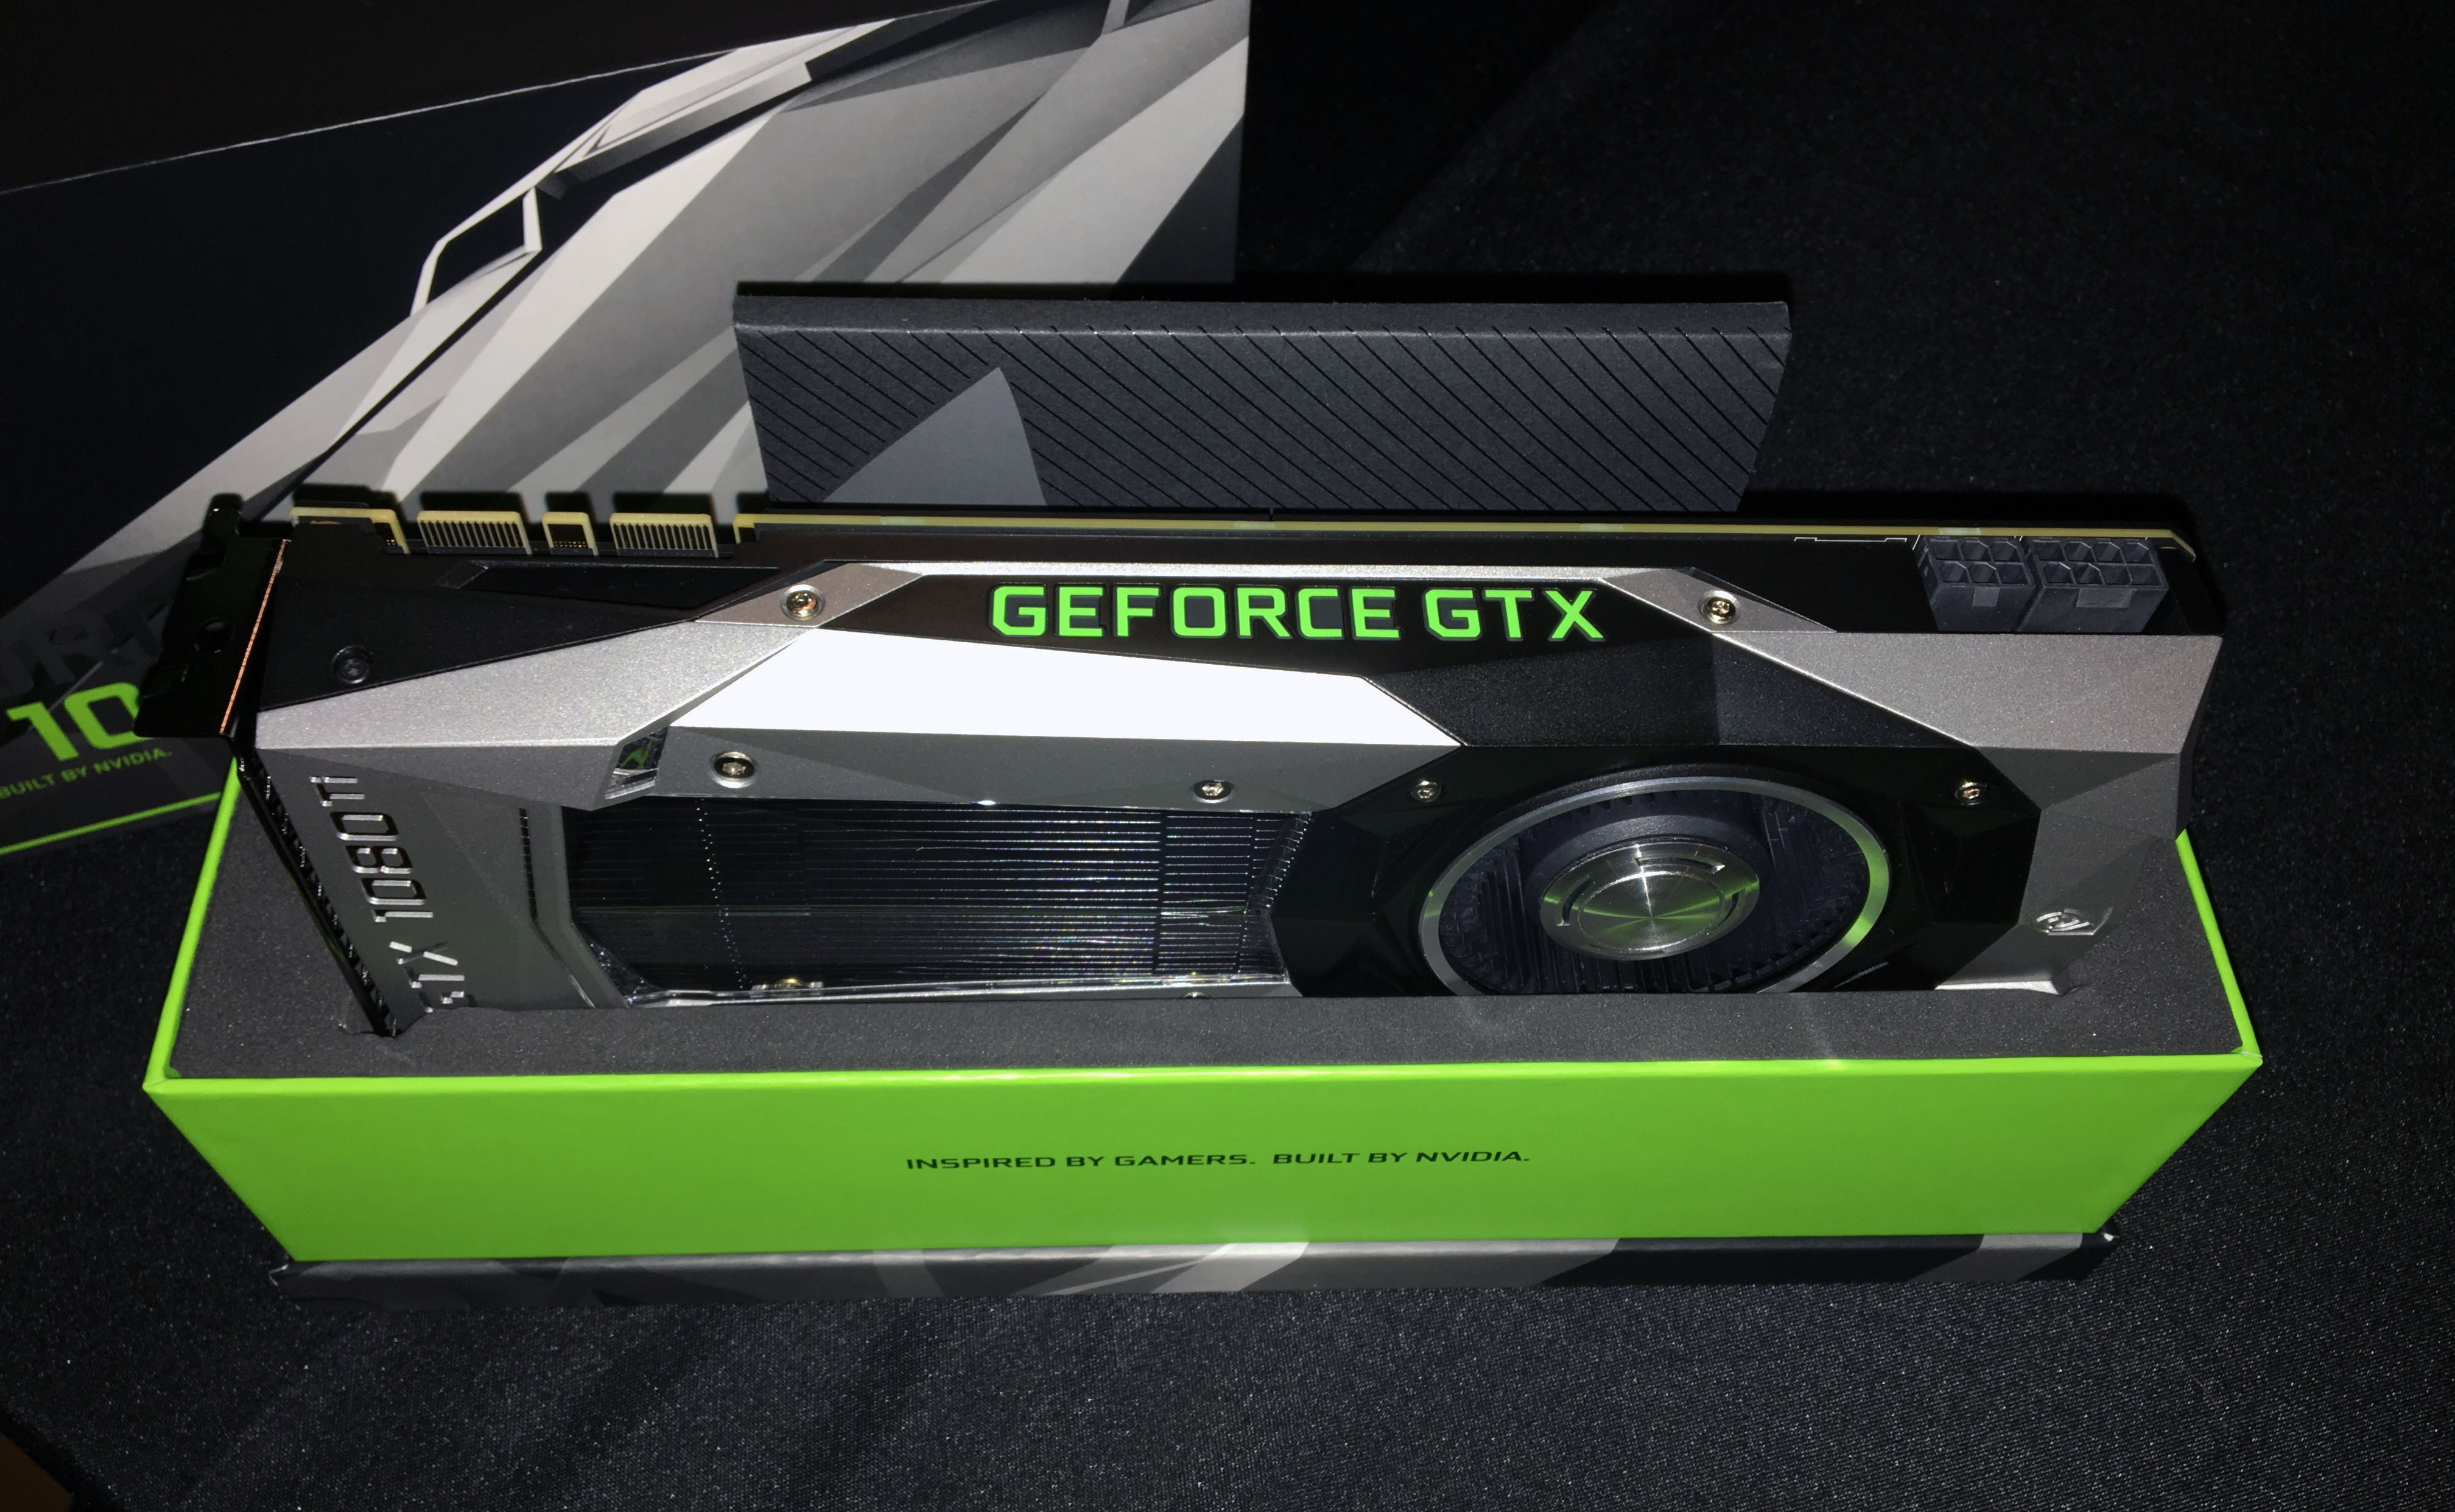 stun undskyldning Løfte NVIDIA Unveils GeForce GTX 1080 Ti: Available Week of March 5th for $699